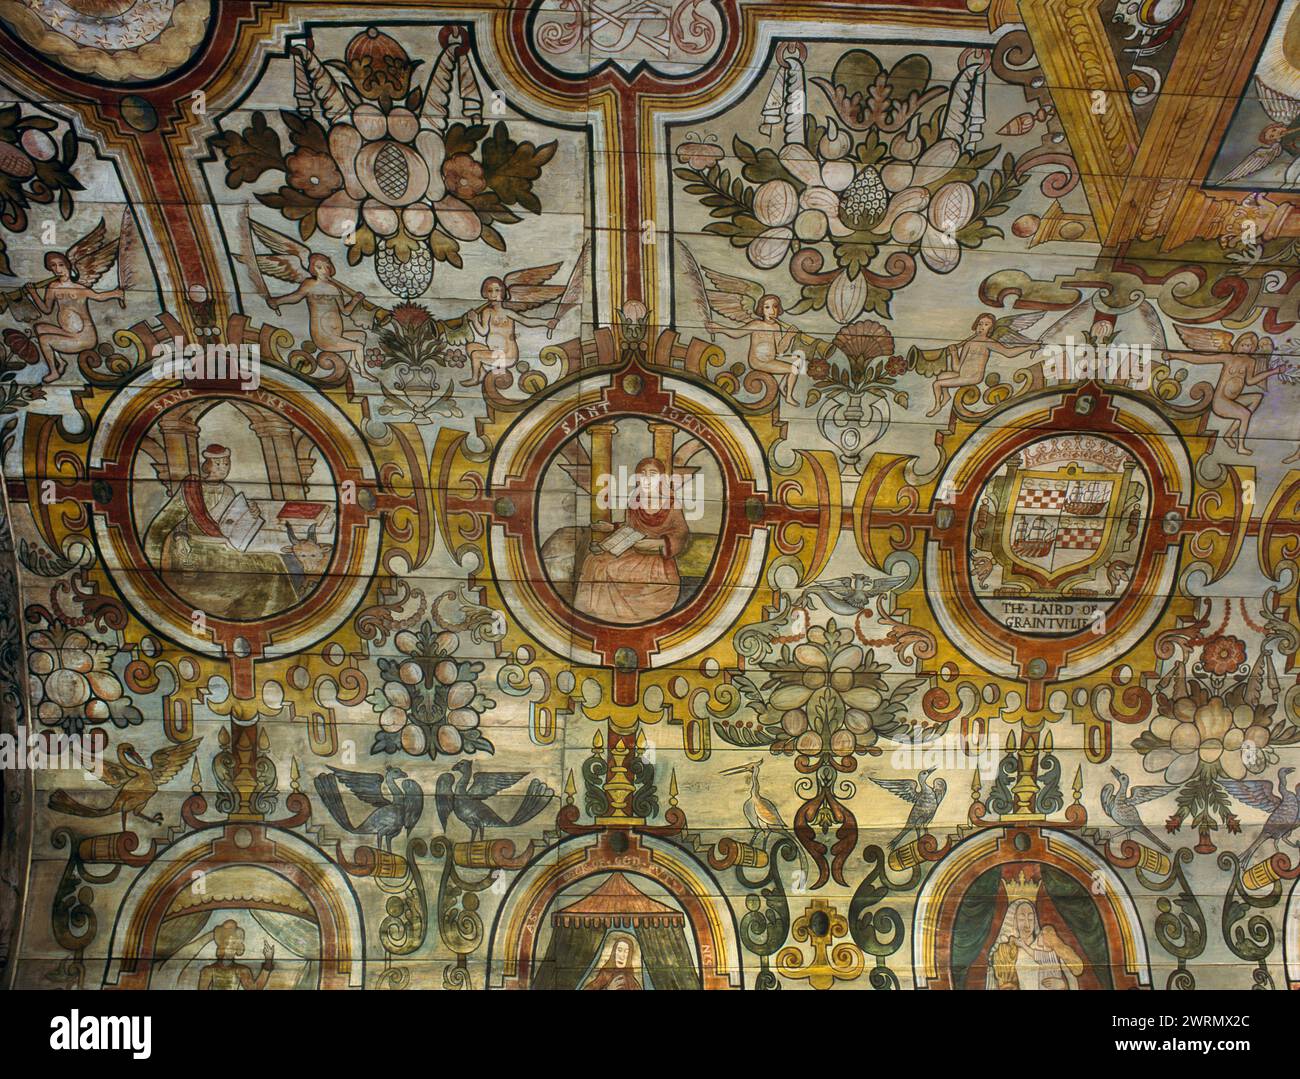 North side of the west end of the C17th (1636) Renaissance-style painted timber ceiling of St Mary's Church, Grandtully, Perthshire, Scotland, UK. Stock Photo